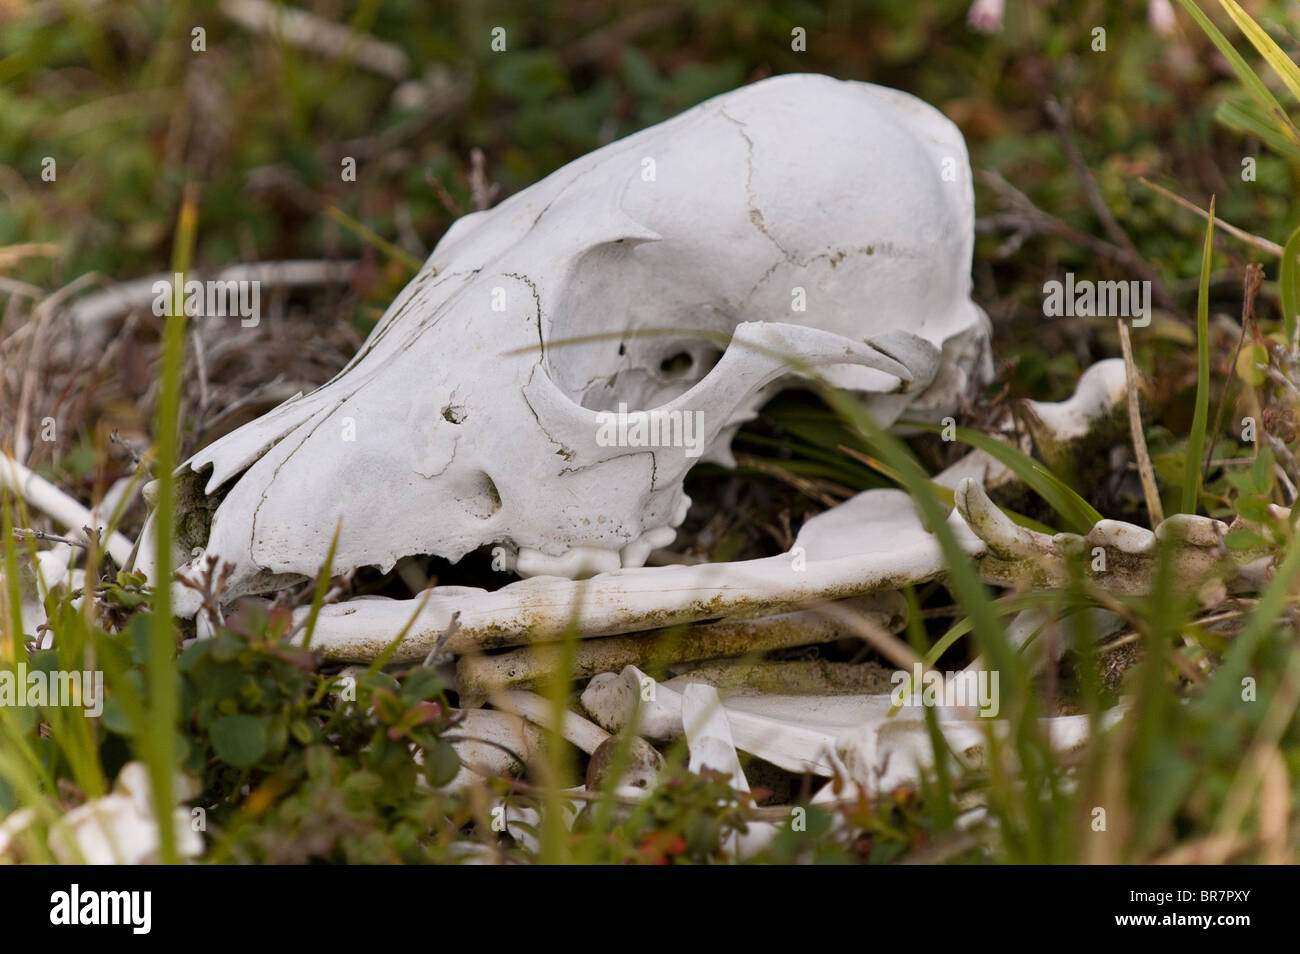 Skeleton of an Arctic Fox - found after the winter snow and ice thawed. Stock Photo